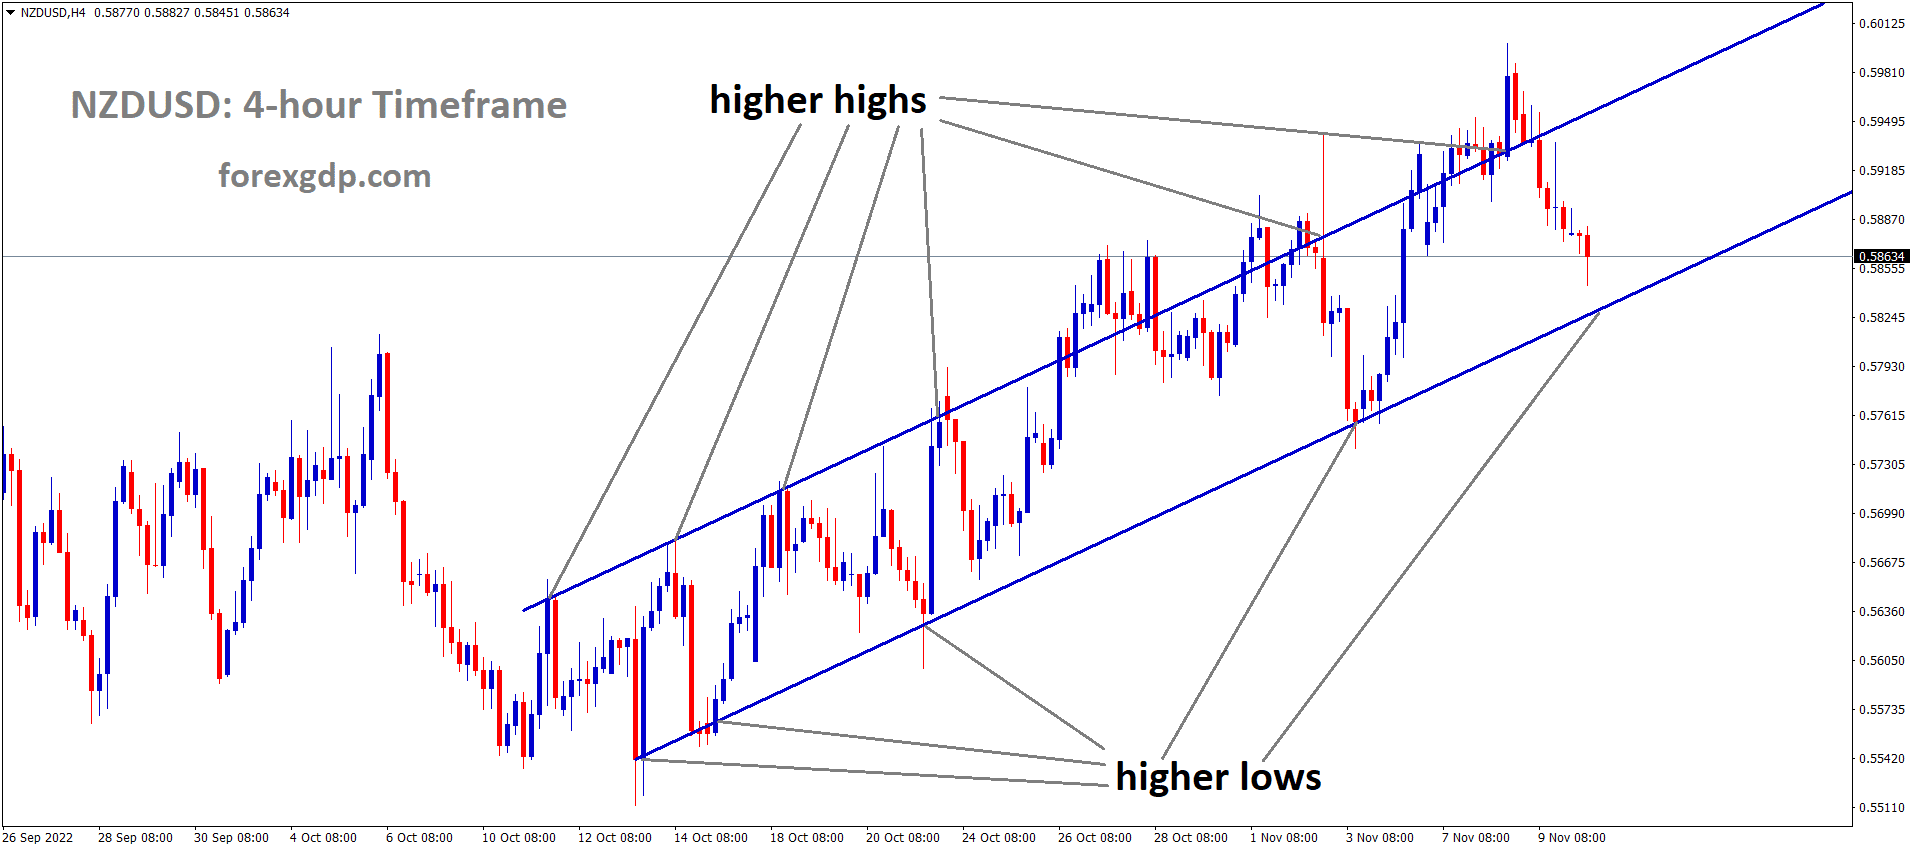 NZDUSD is moving in an Ascending channel and the market has reached the higher low area of the channel 2